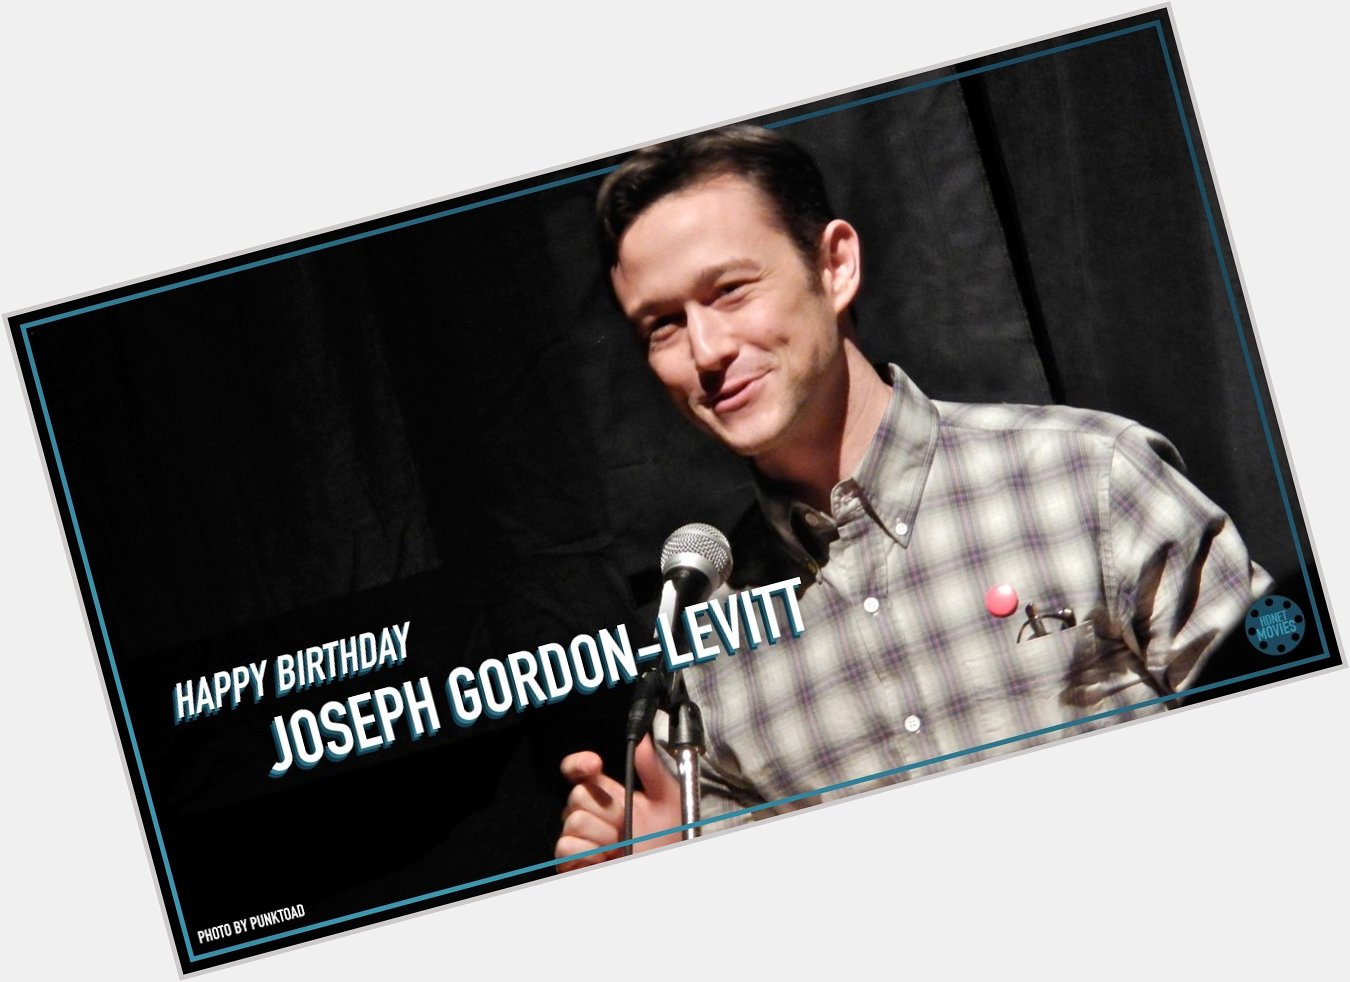 Hoping to see many more movies from this guy. Happy 37th Birthday, Joseph Gordon-Levitt! 